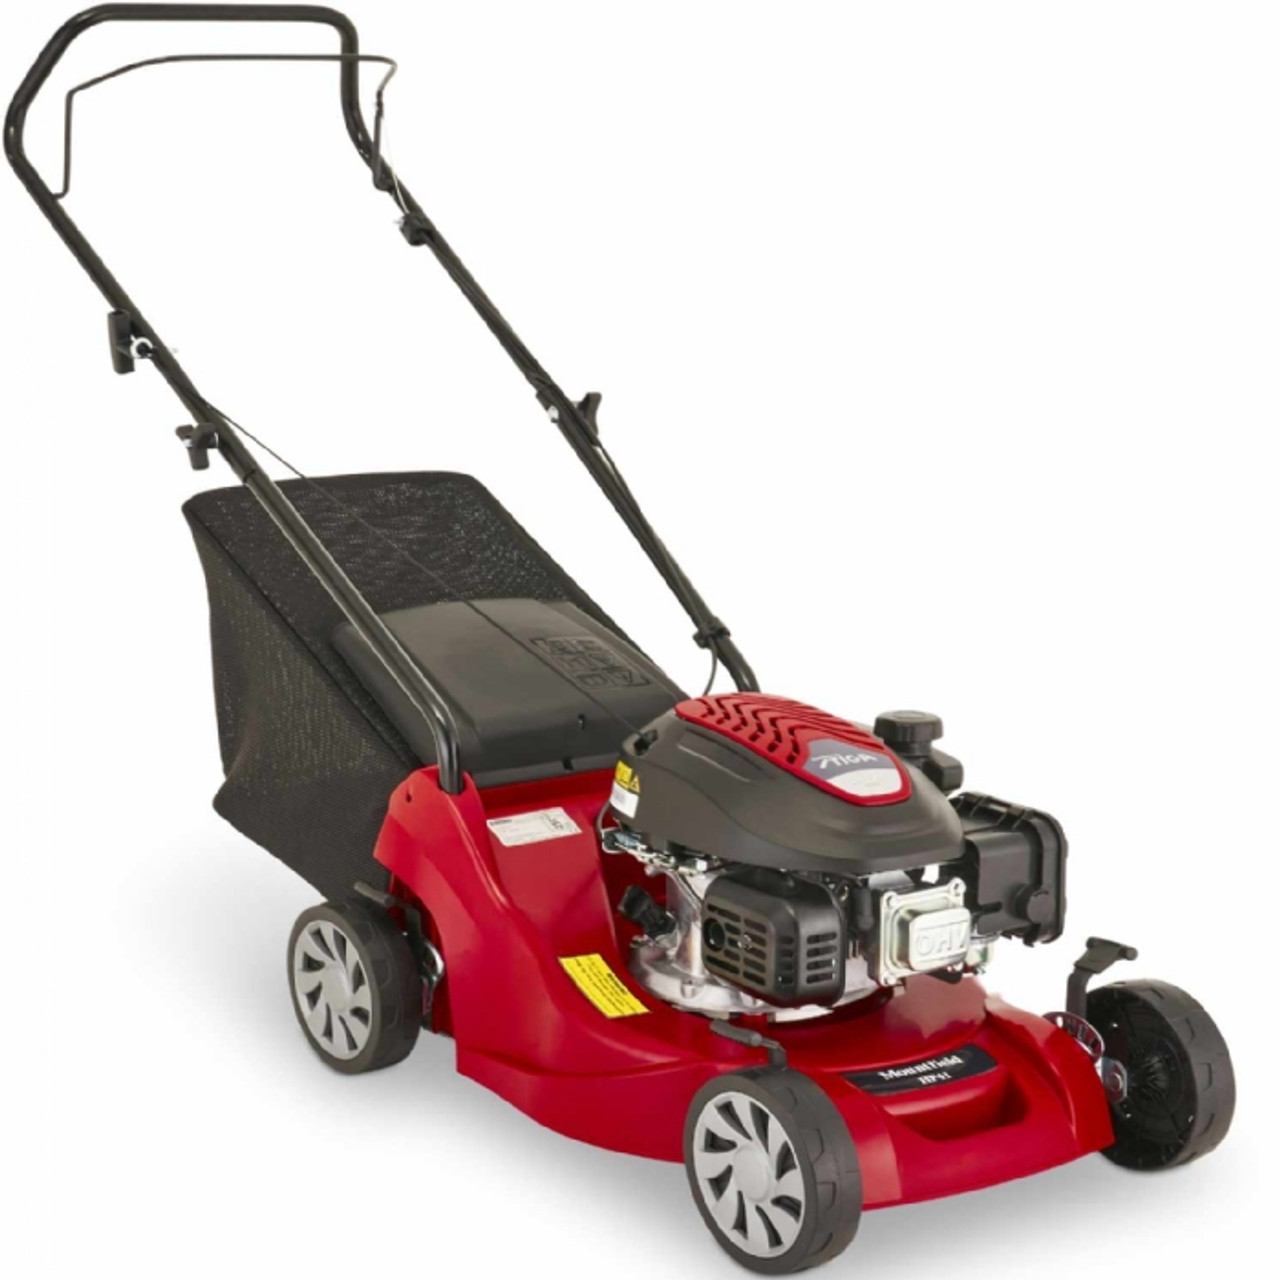 Mountfield 39cm Petrol Push Rotary Mower  - LOCAL DELIVERY ONLY